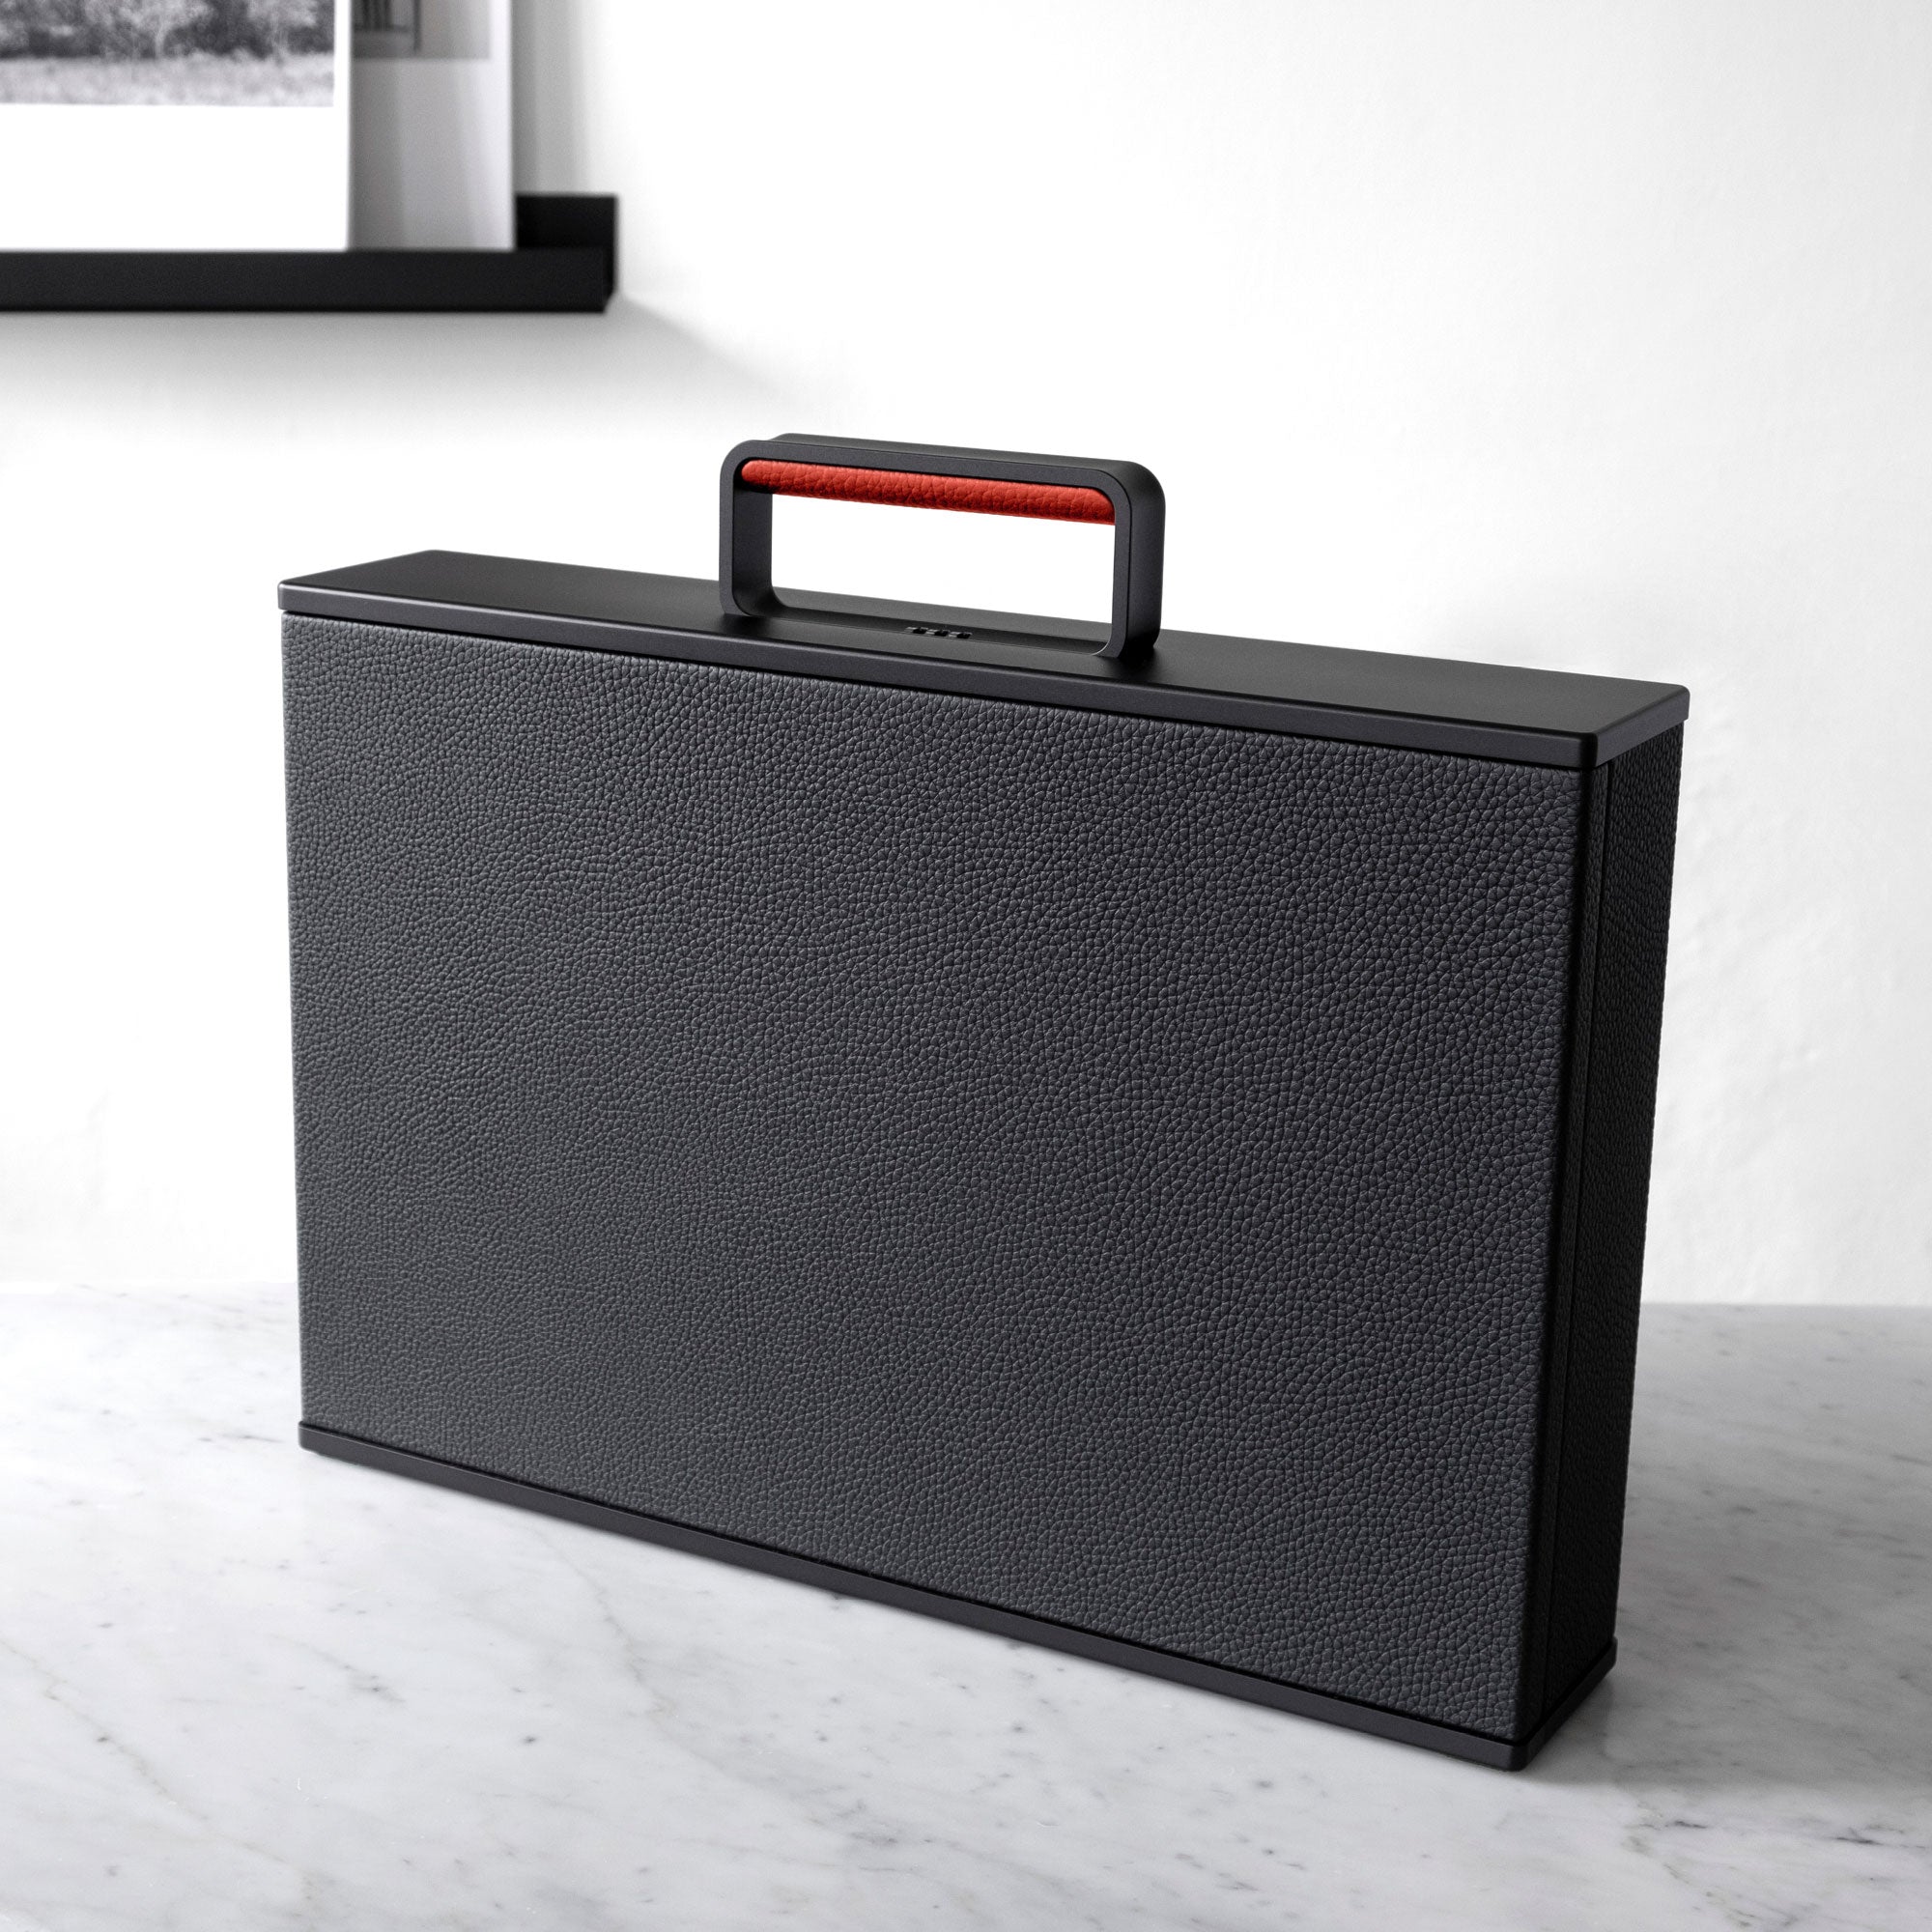 Lifestyle photo of 3/4 view of the boldly minimalist black and red Mackenzie briefcase. This luxurious briefcase transports all your work essentials in style. 